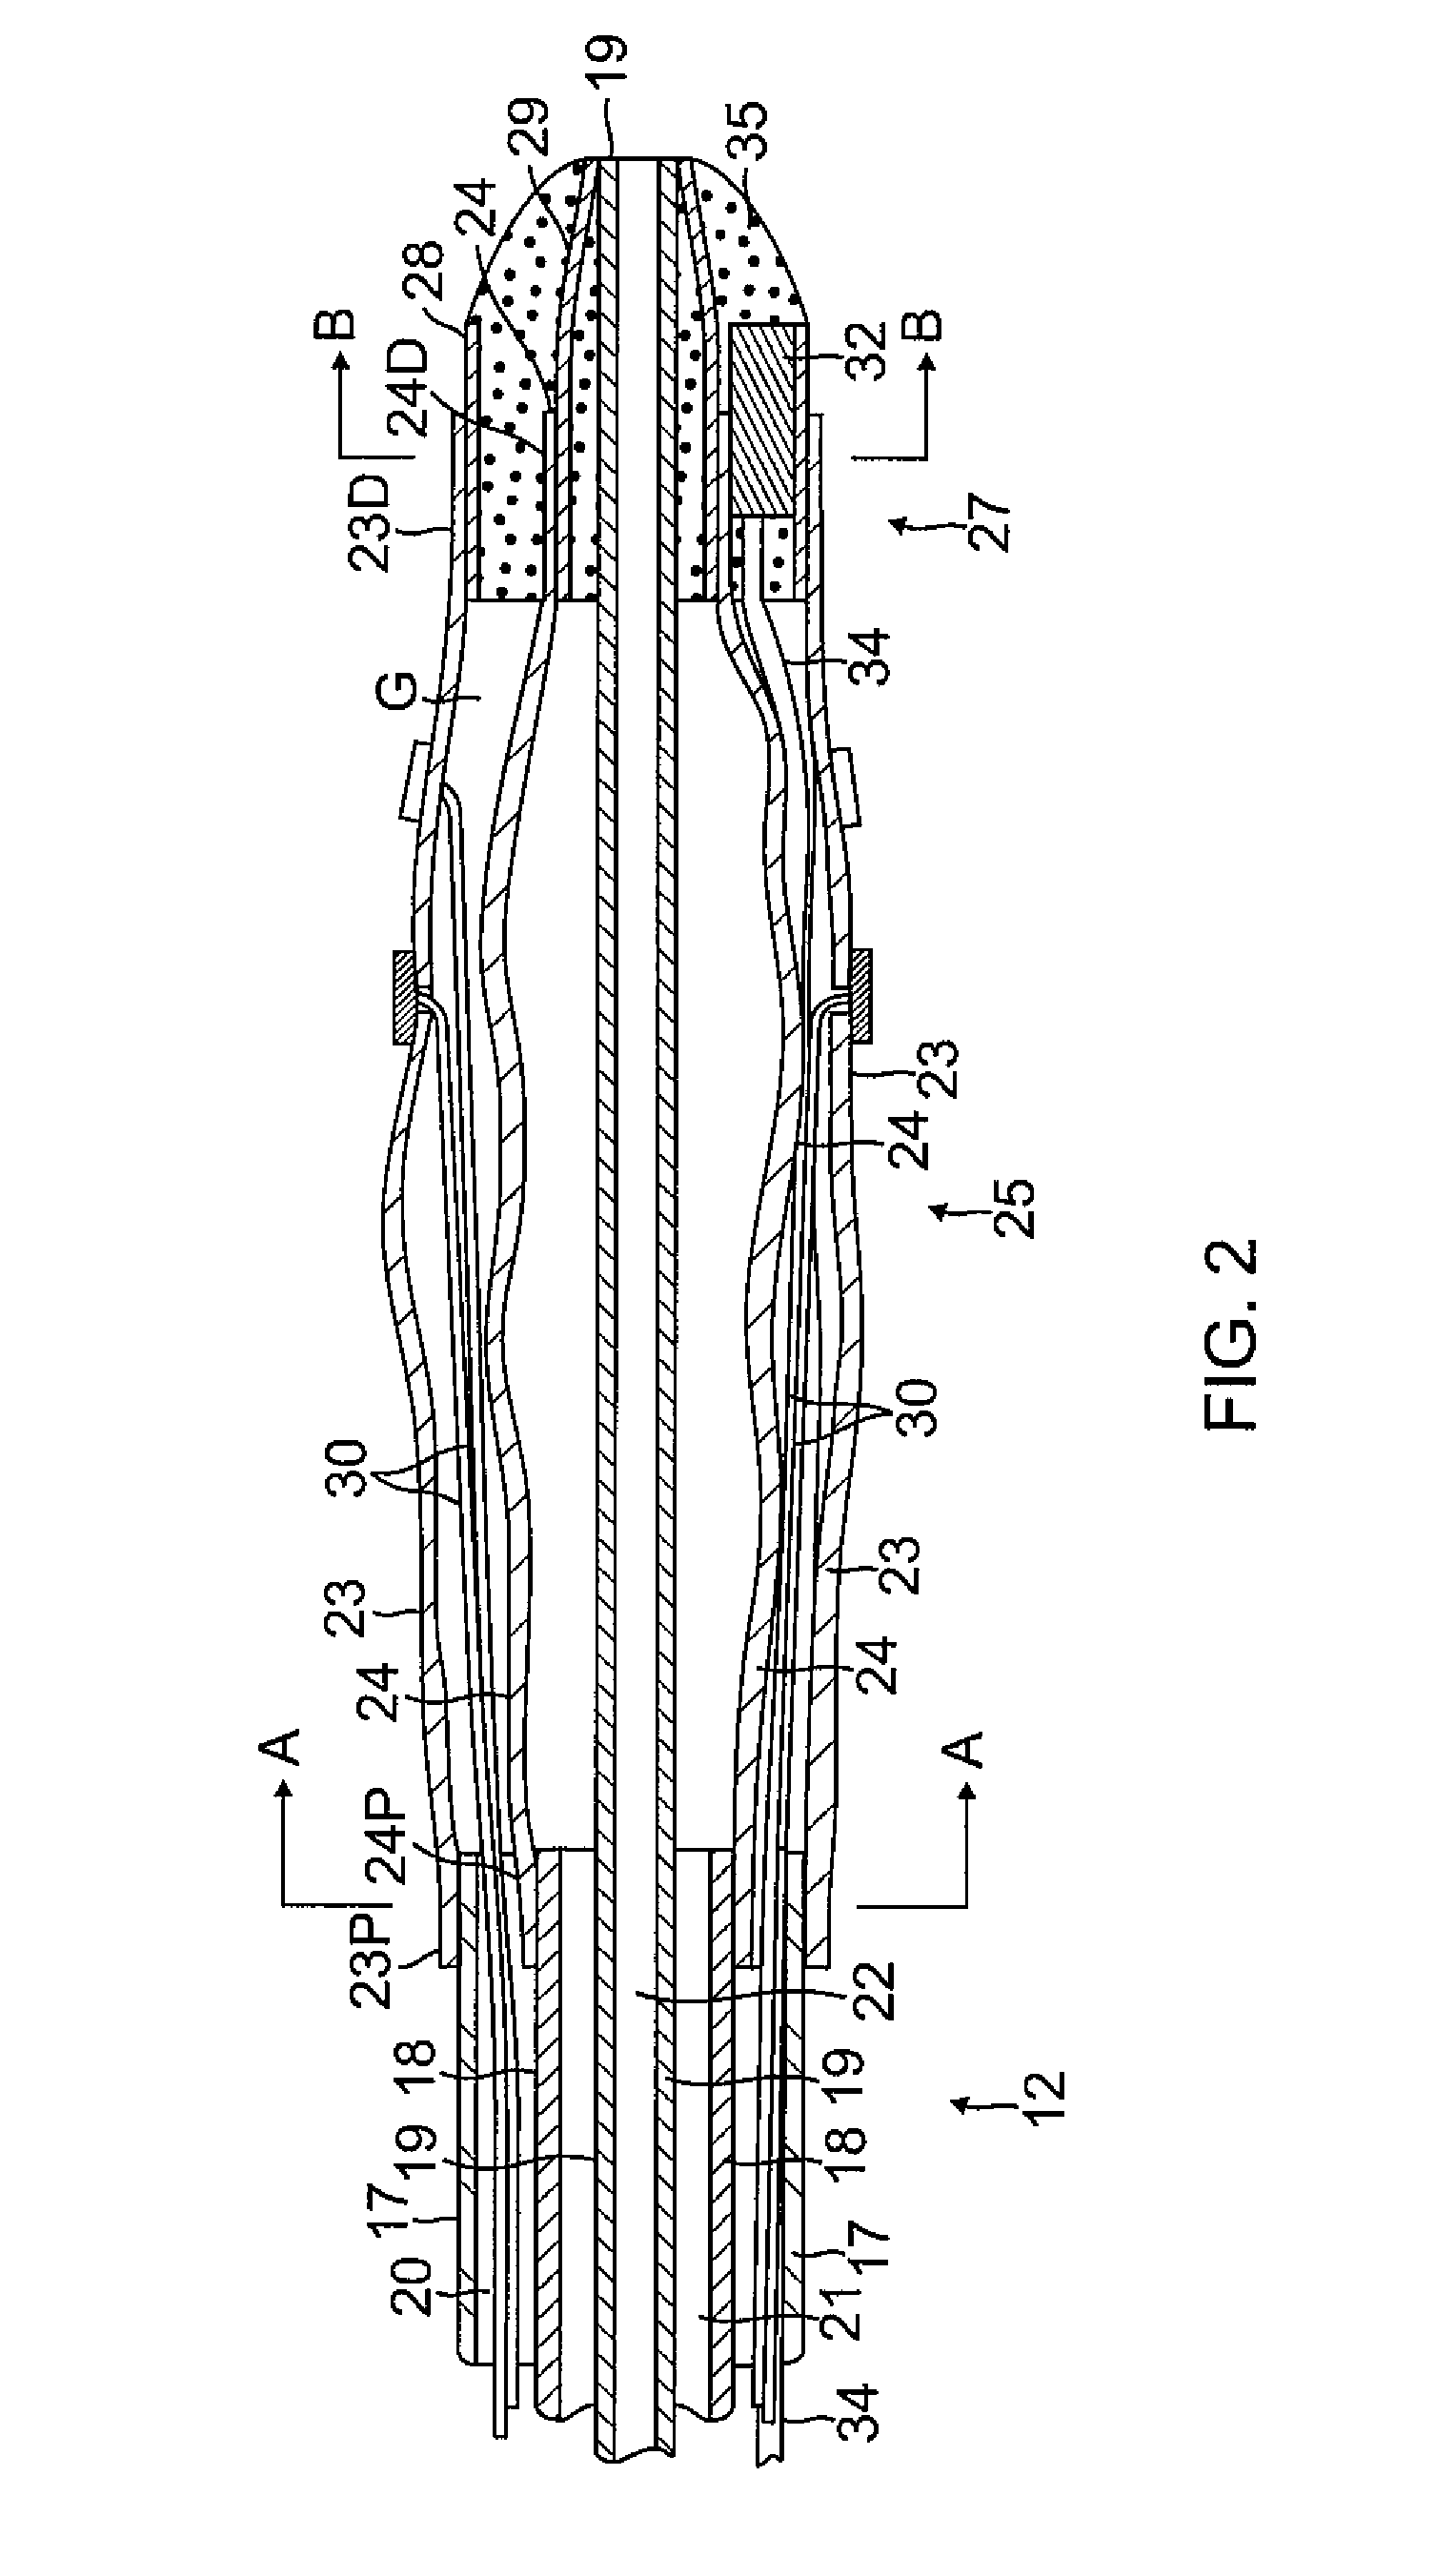 Multi-electrode balloon catheter with circumferential and point electrodes